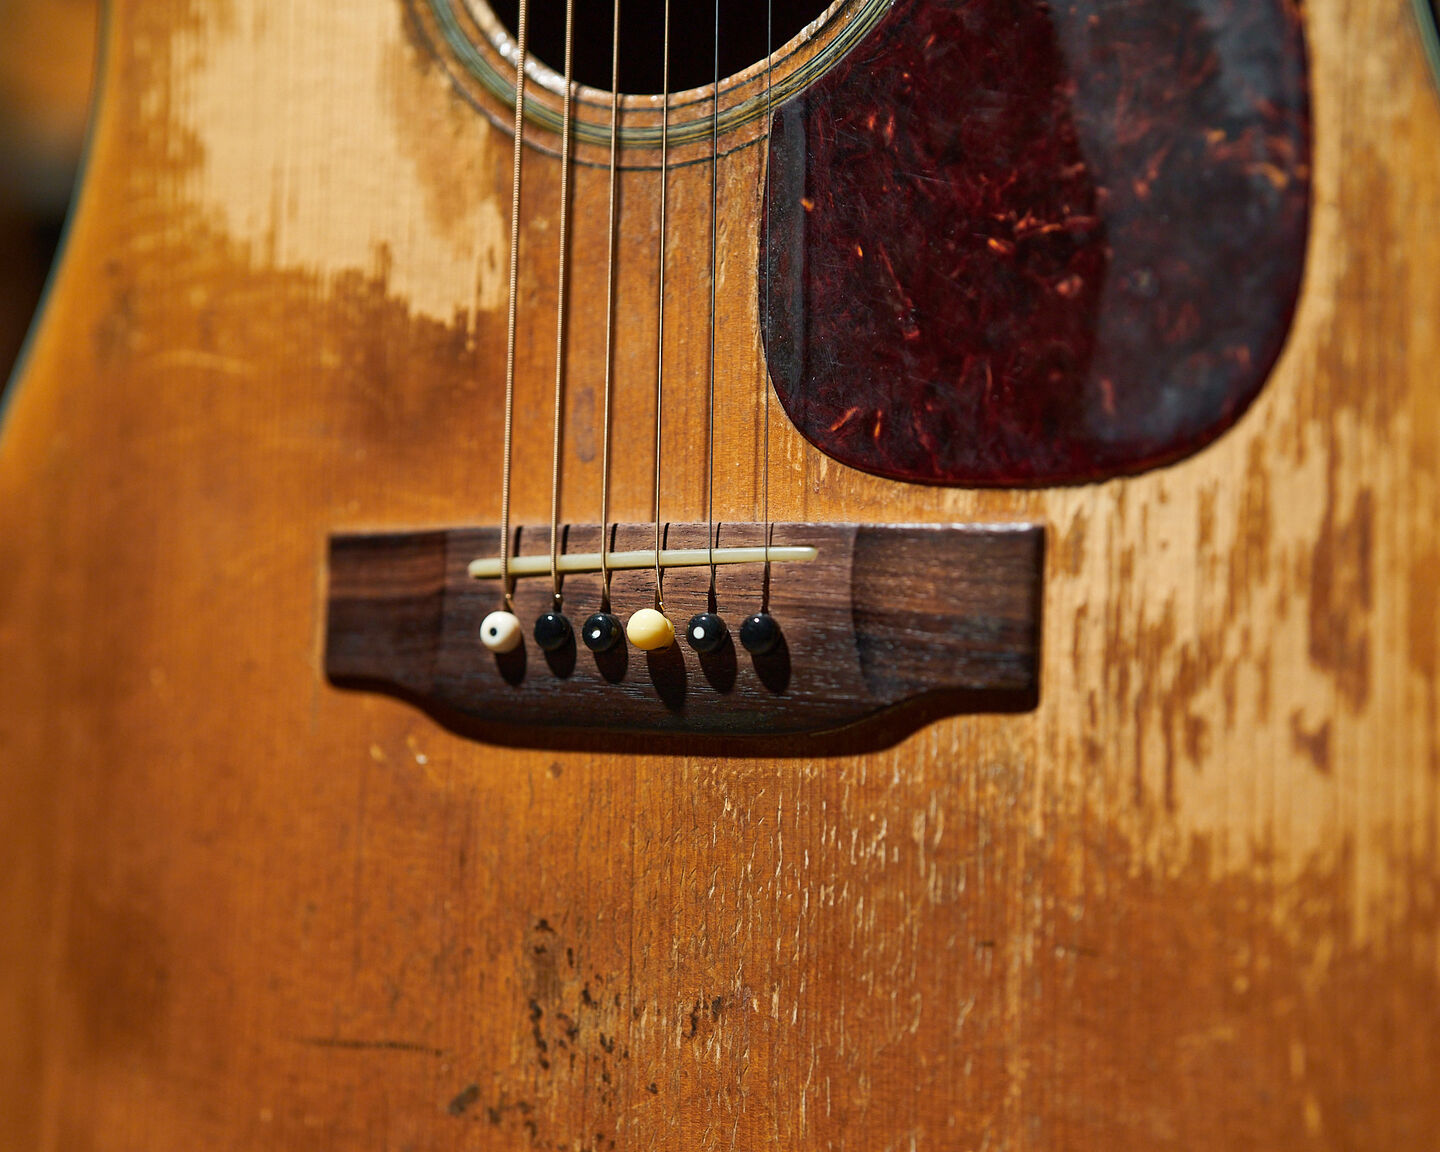 Closeup of a well-worn acoustic guitar